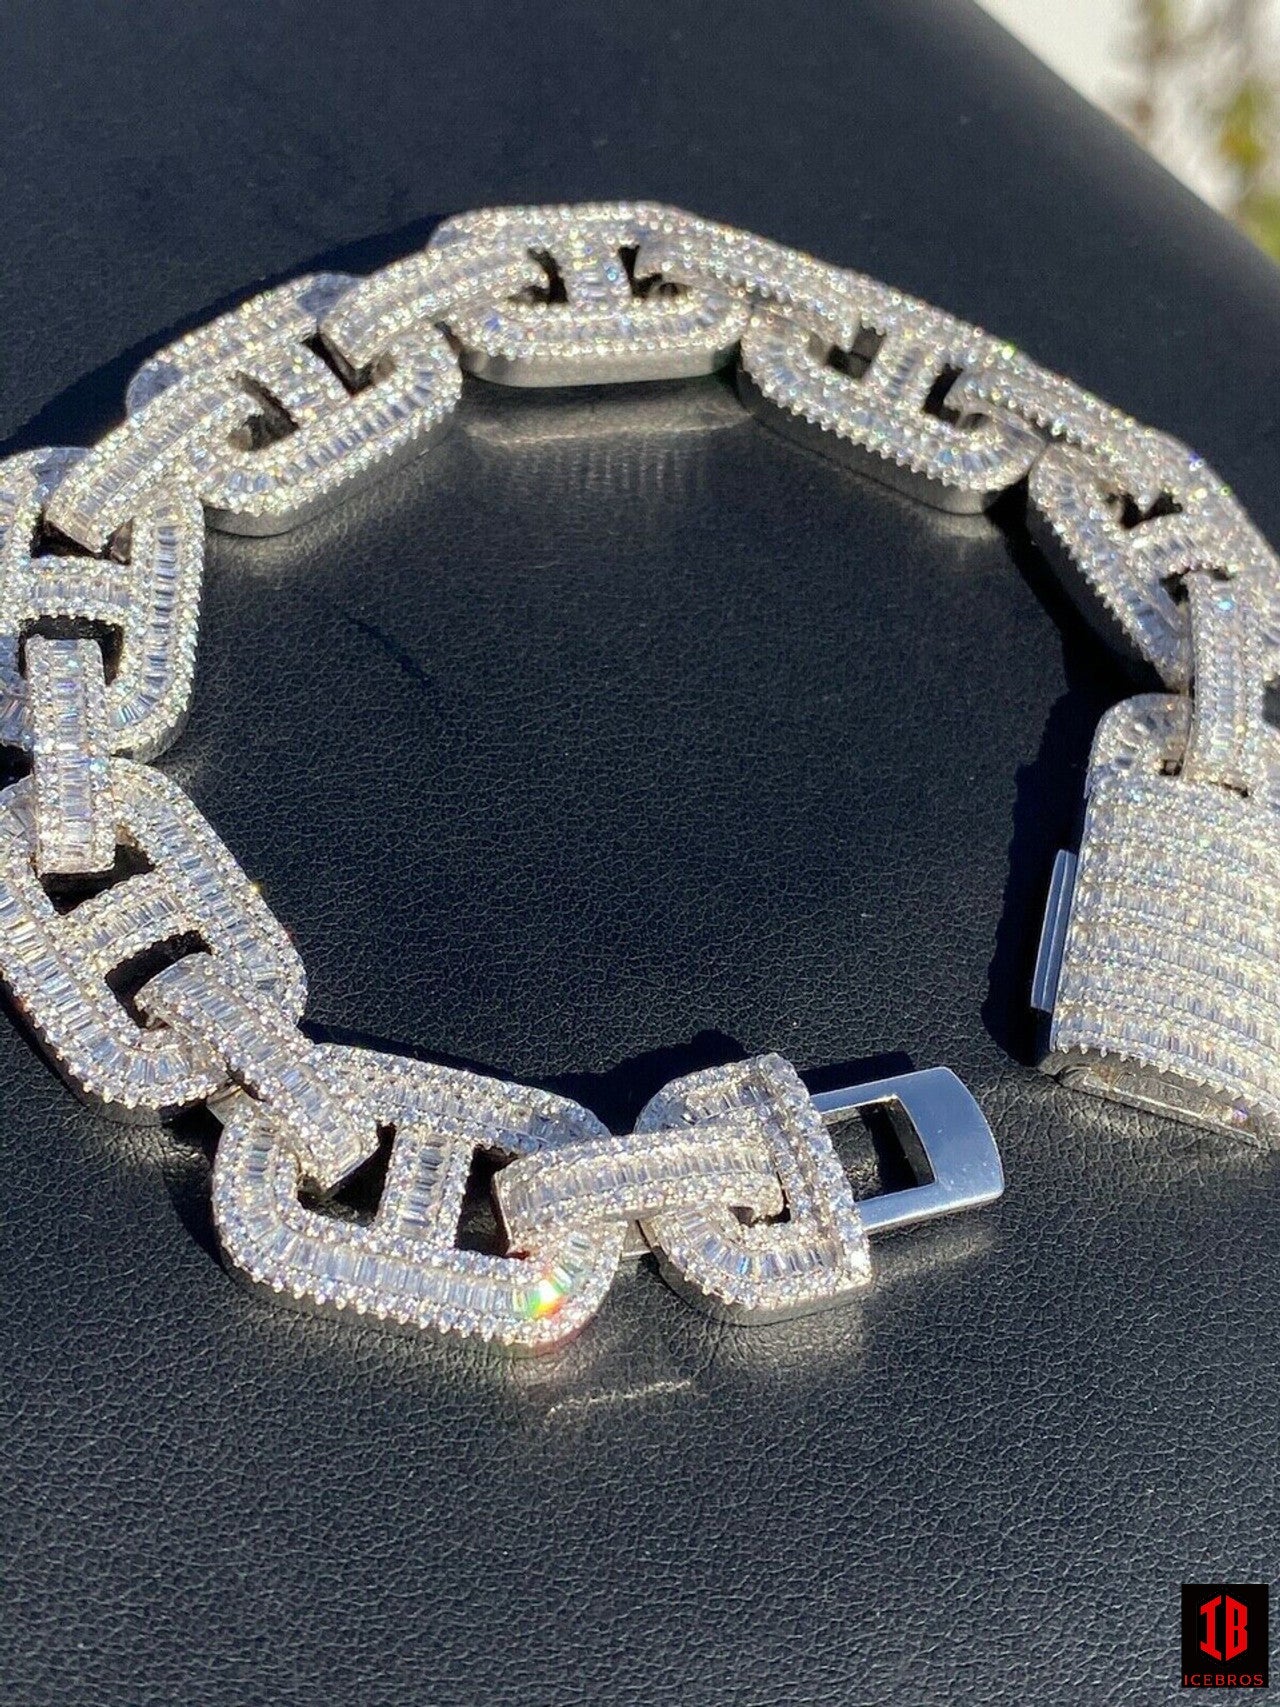 RHODIUM Men’s Solid 925 Silver Baguette Gucci Link Bracelet Iced Thick Flooded Out 15mm